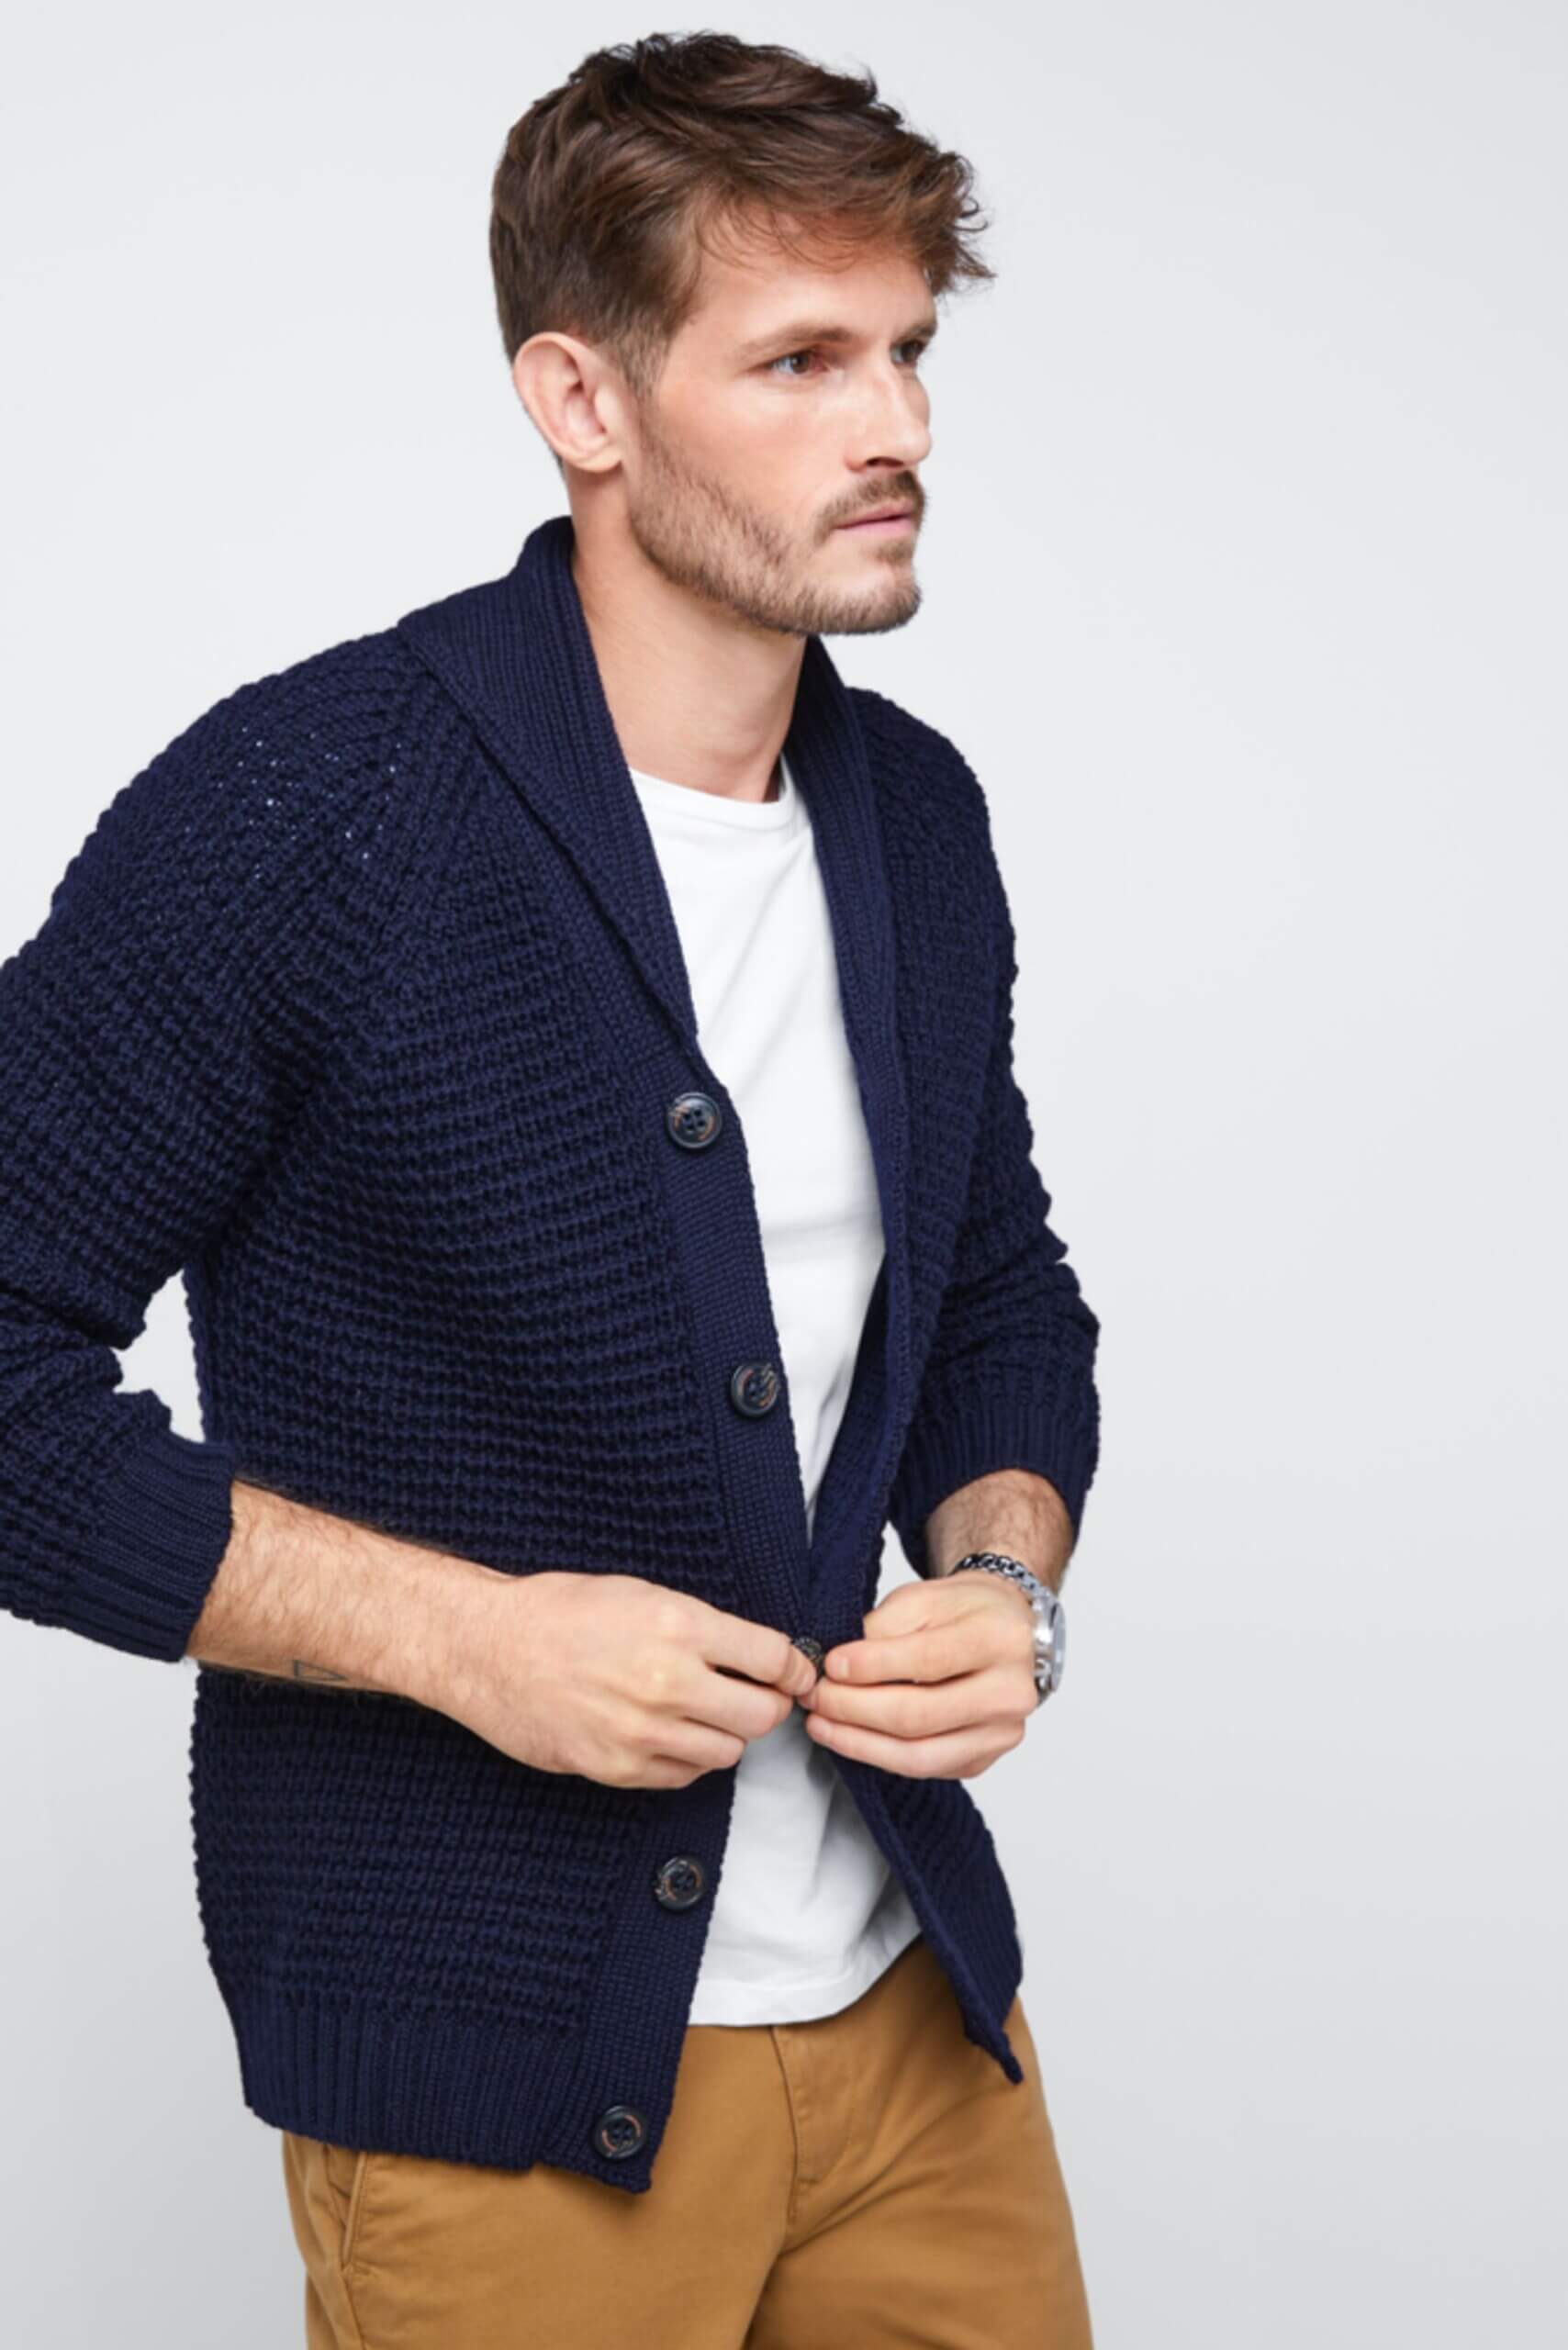 Perception Registration Awesome How to Wear Cardigans for Men | Style Guide | Stitch Fix